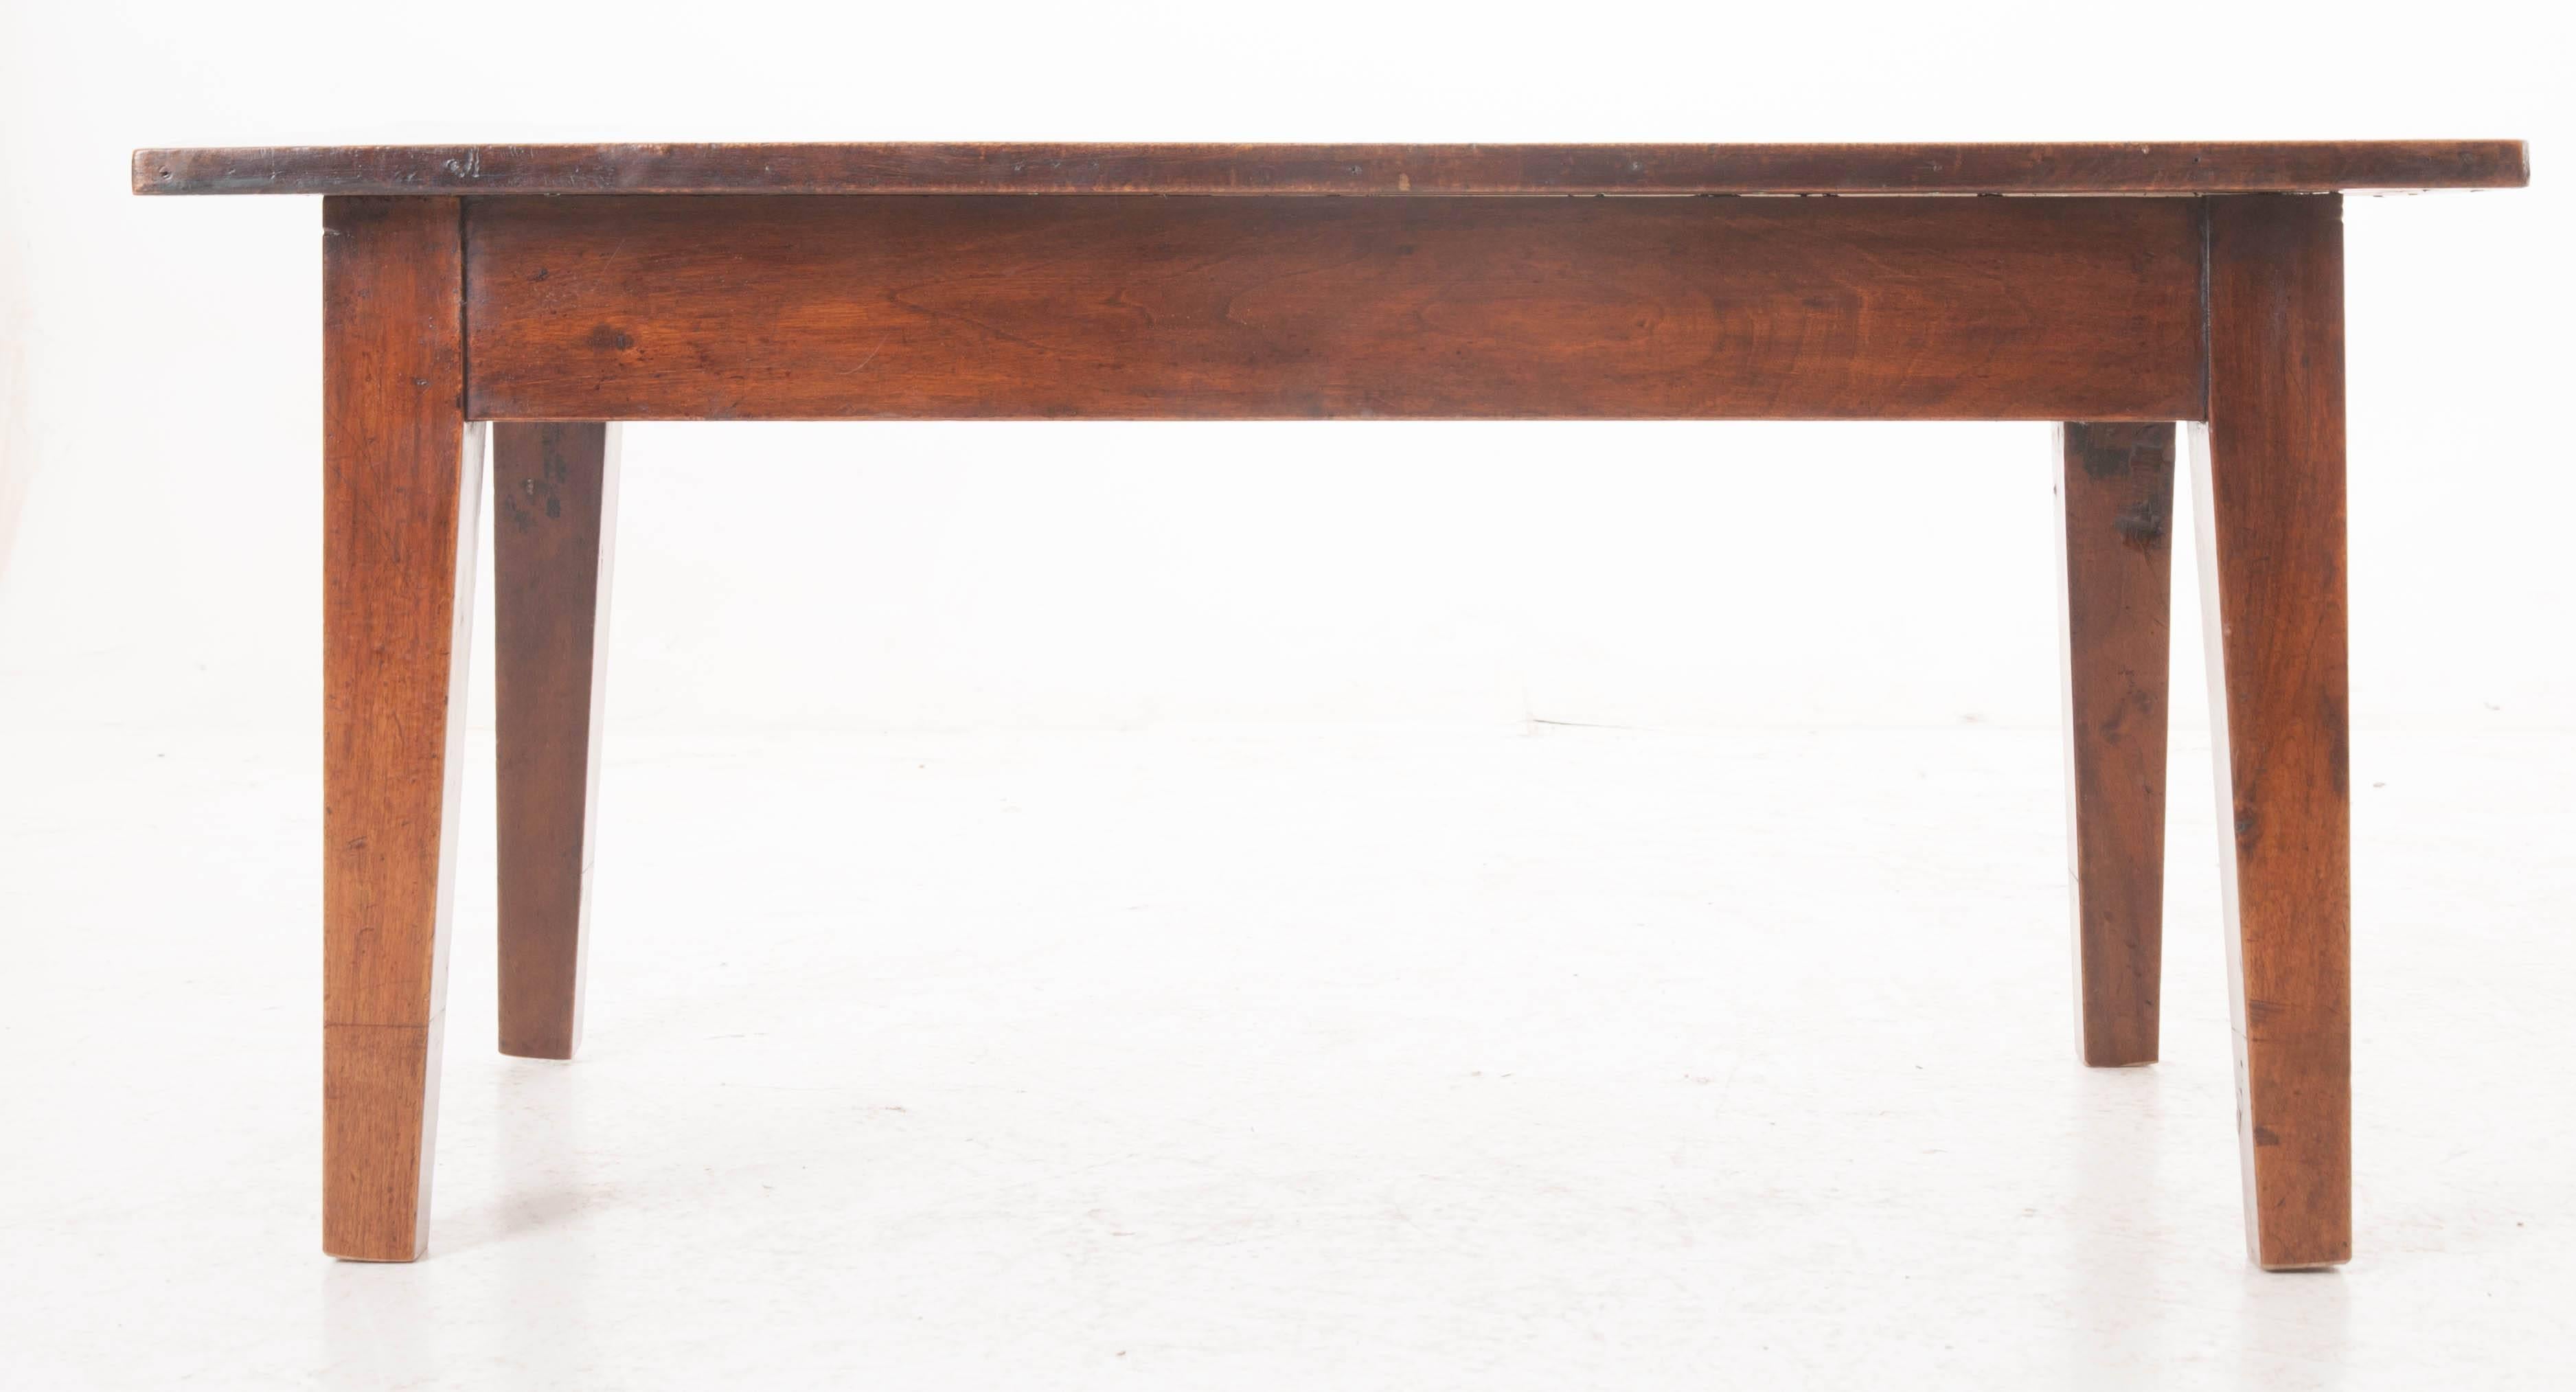 A charming coffee table from 1850s, France. This simple, rustic coffee table is all about warmth and patina. The freshly polished top reveals the grain and character of the beautiful walnut. Time has been good to this piece, as it has only become